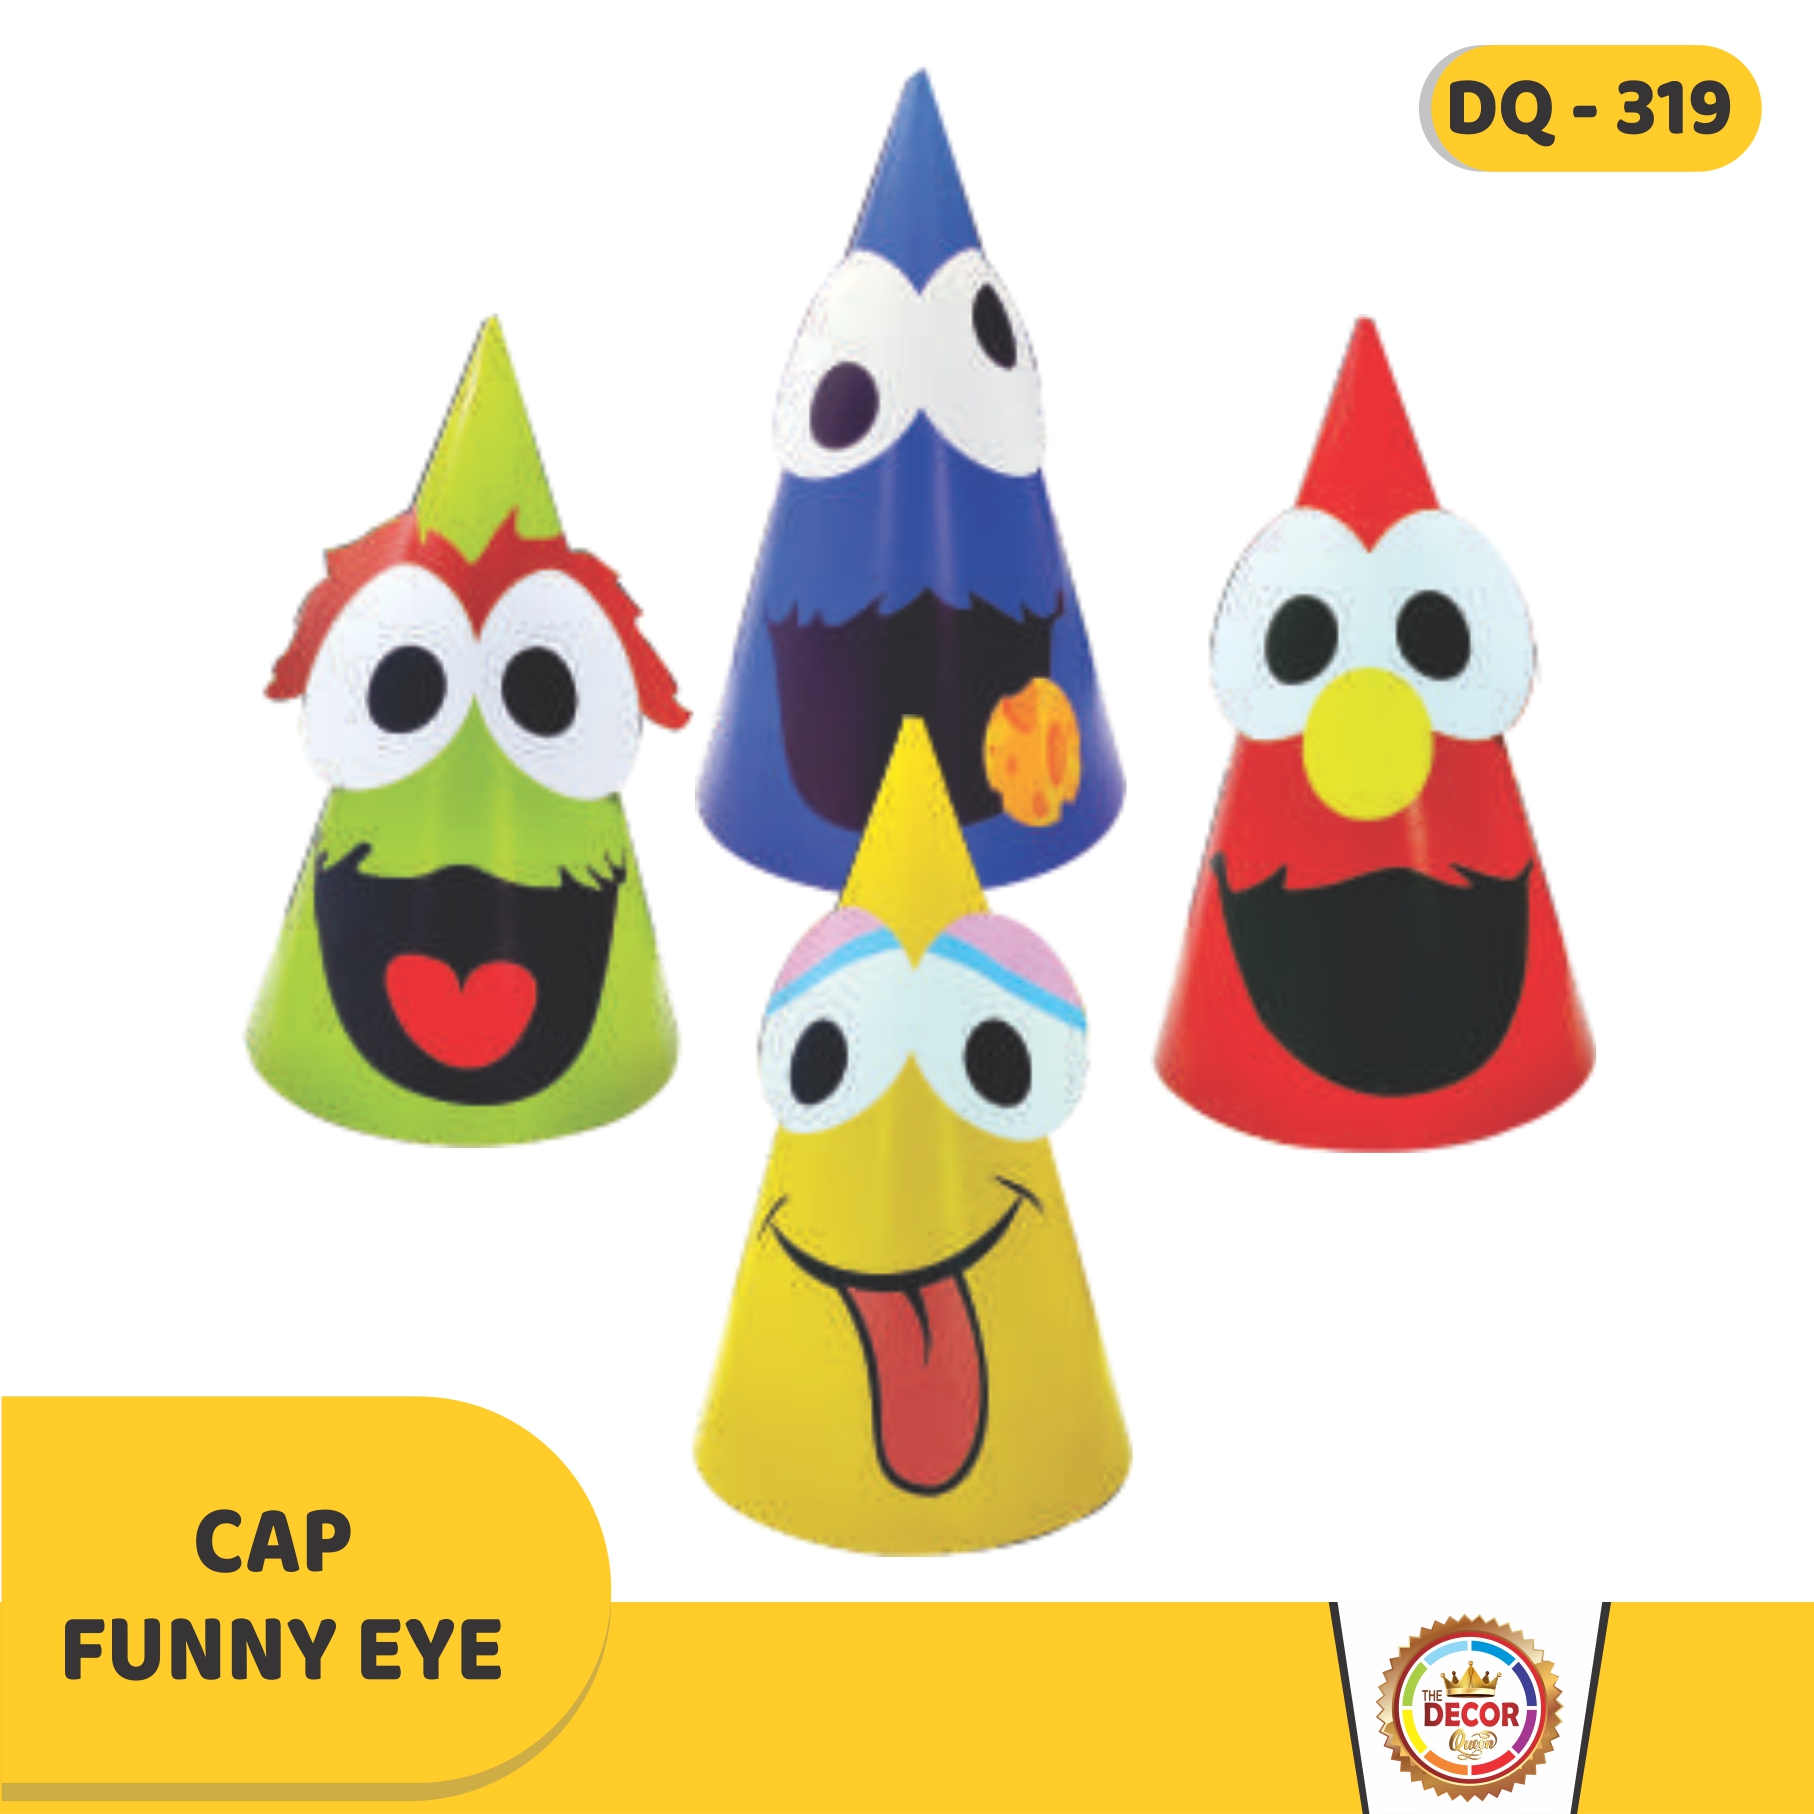 CAP FUNNY EYE |Party Products|Cap